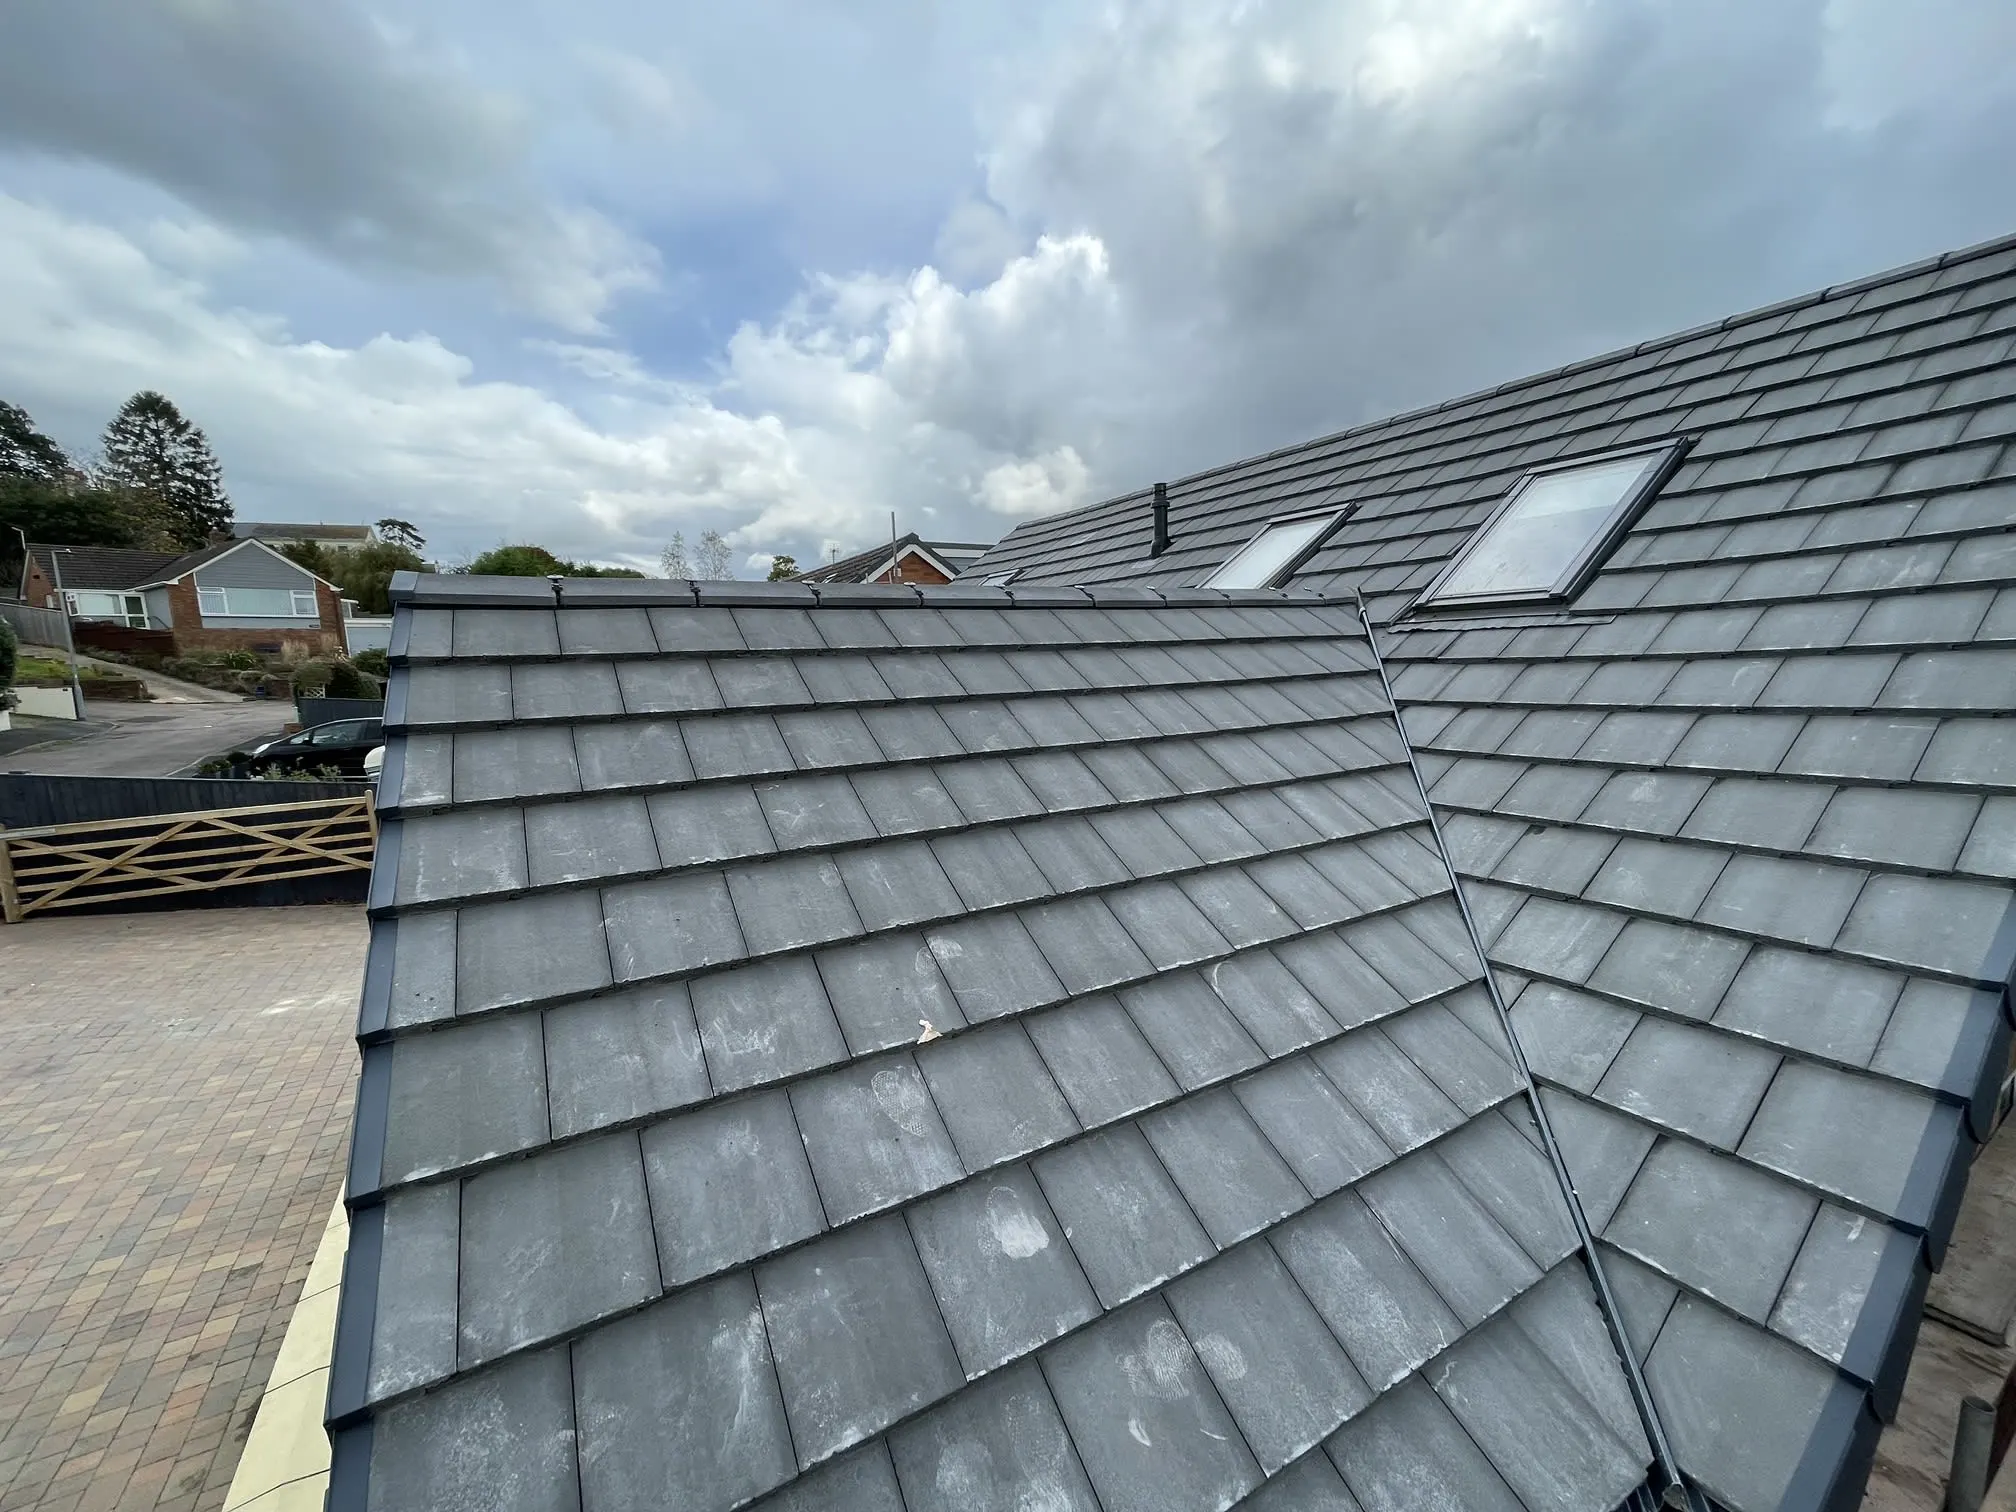 JAW Roofing Tiverton 07985 588840